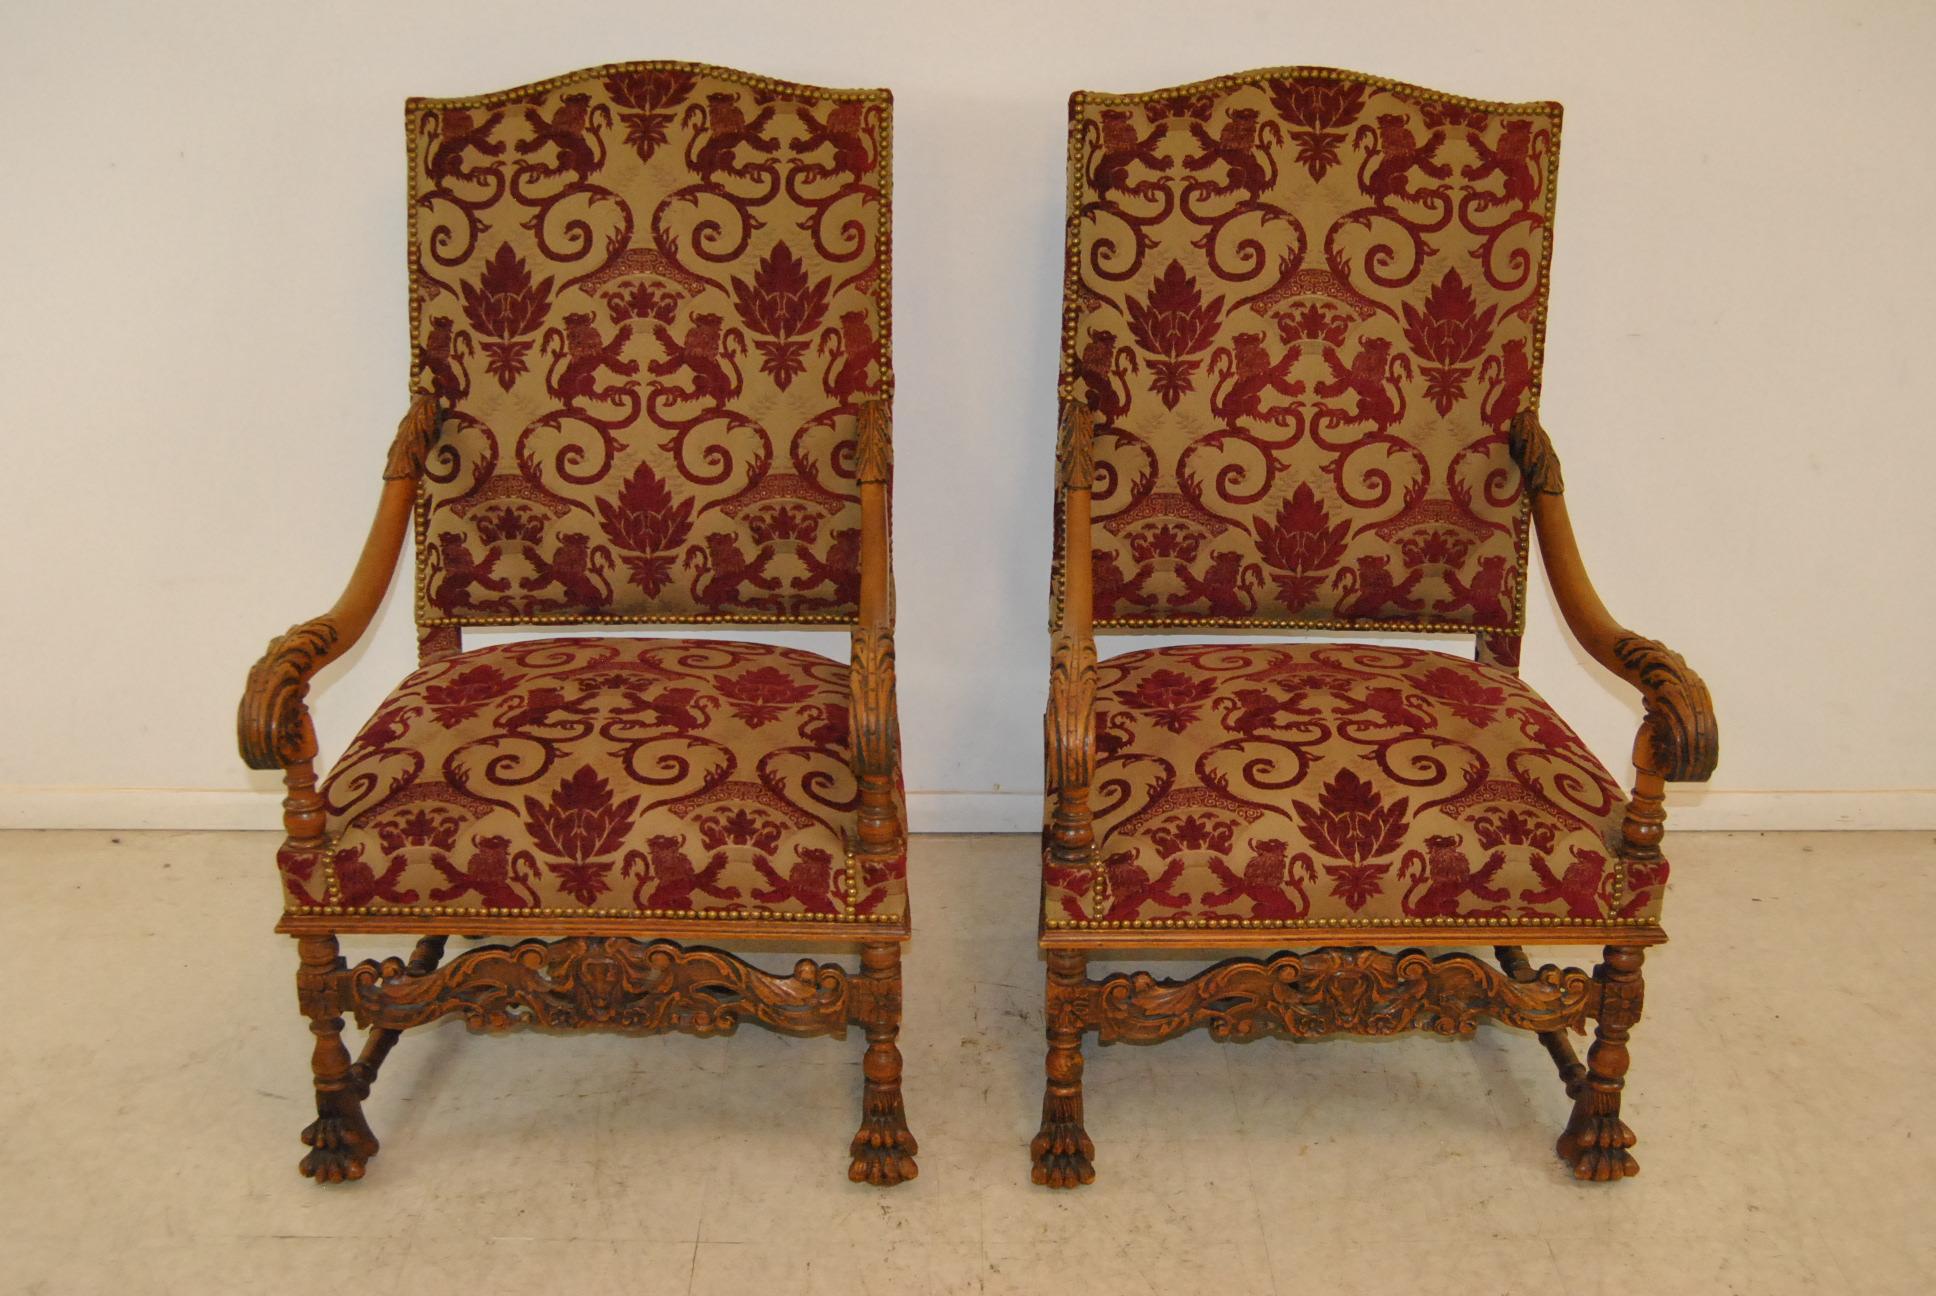 A beautiful pair of antique French style Renaissance armchairs. This pair of chairs offers a stately presentation. They are done in a nice oak with scrolling carved arms that have deep relief carving. Very nice and well executed. The chair frames